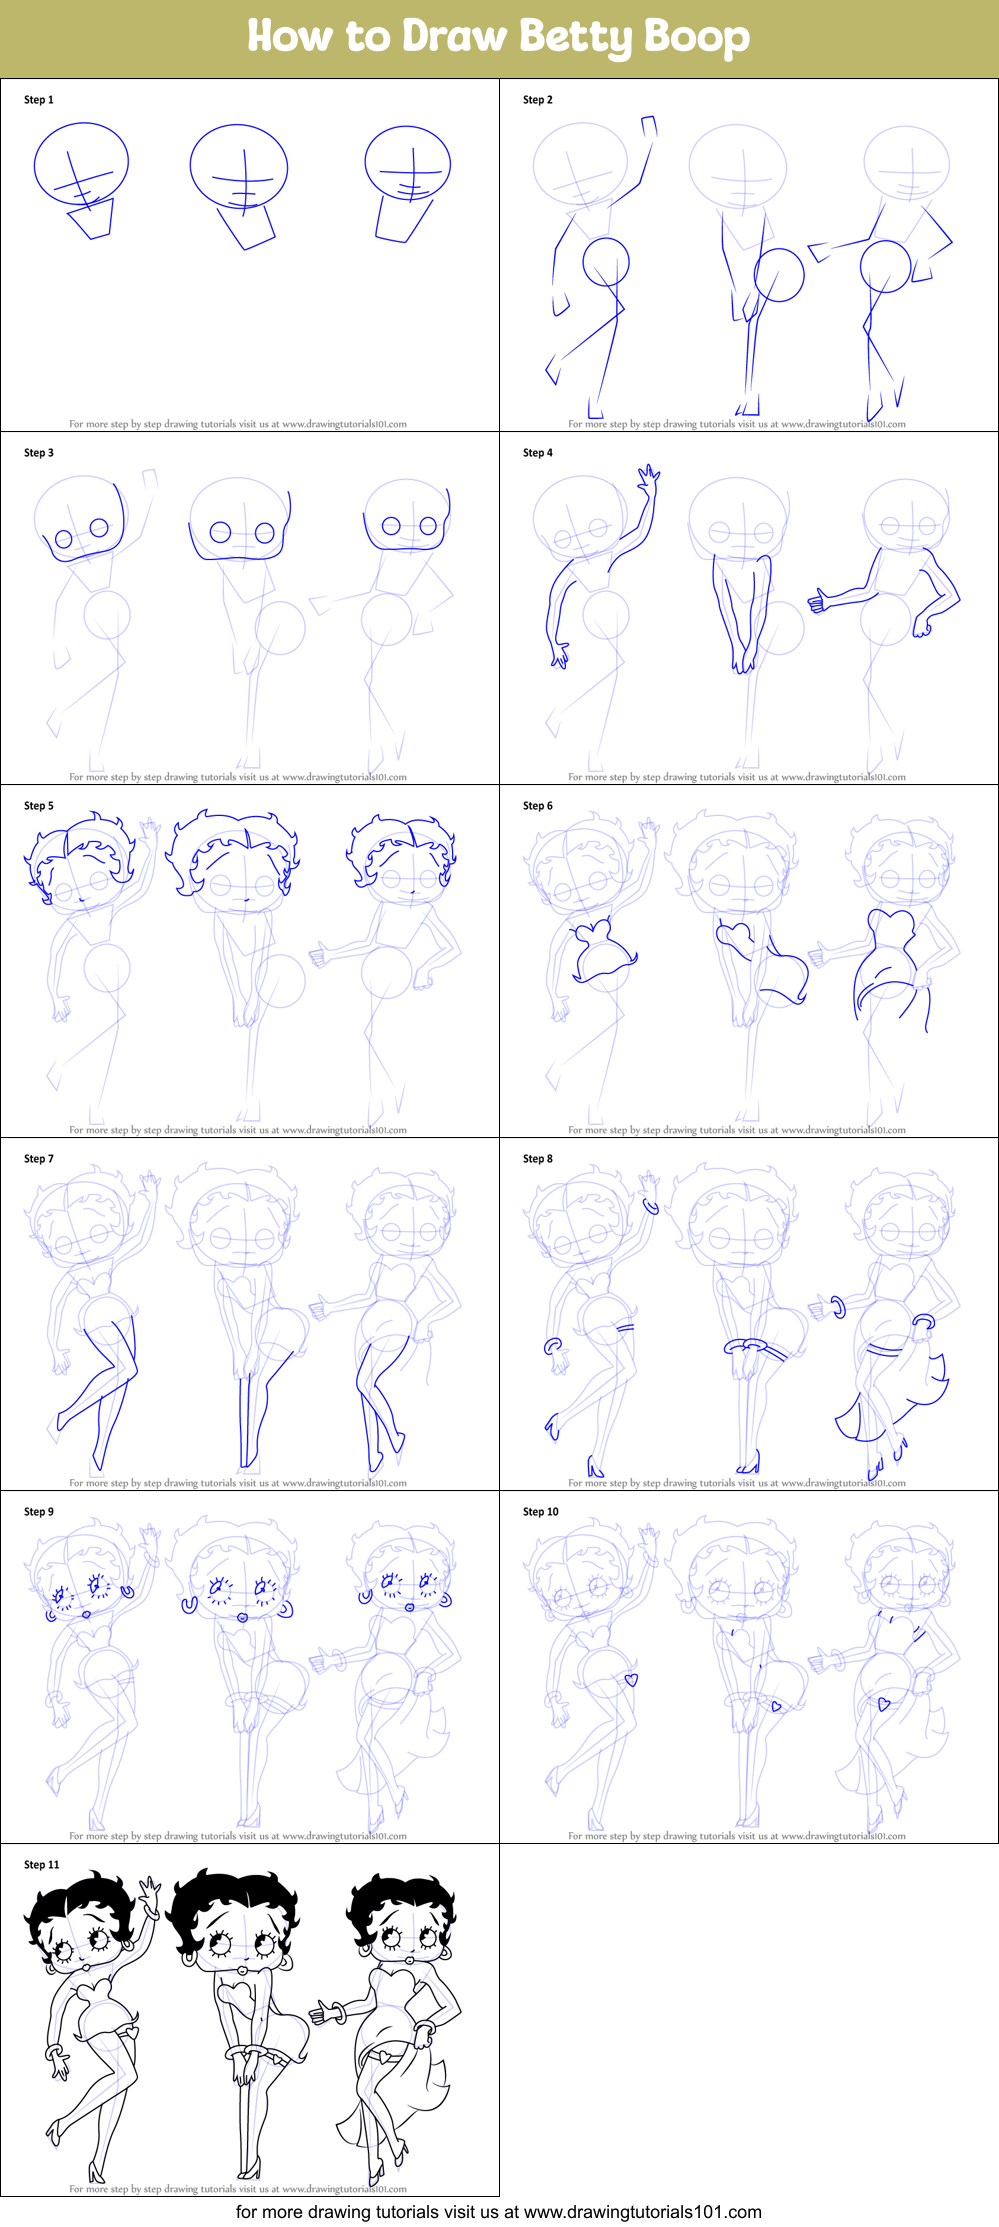 How to Draw Betty Boop printable step by step drawing sheet